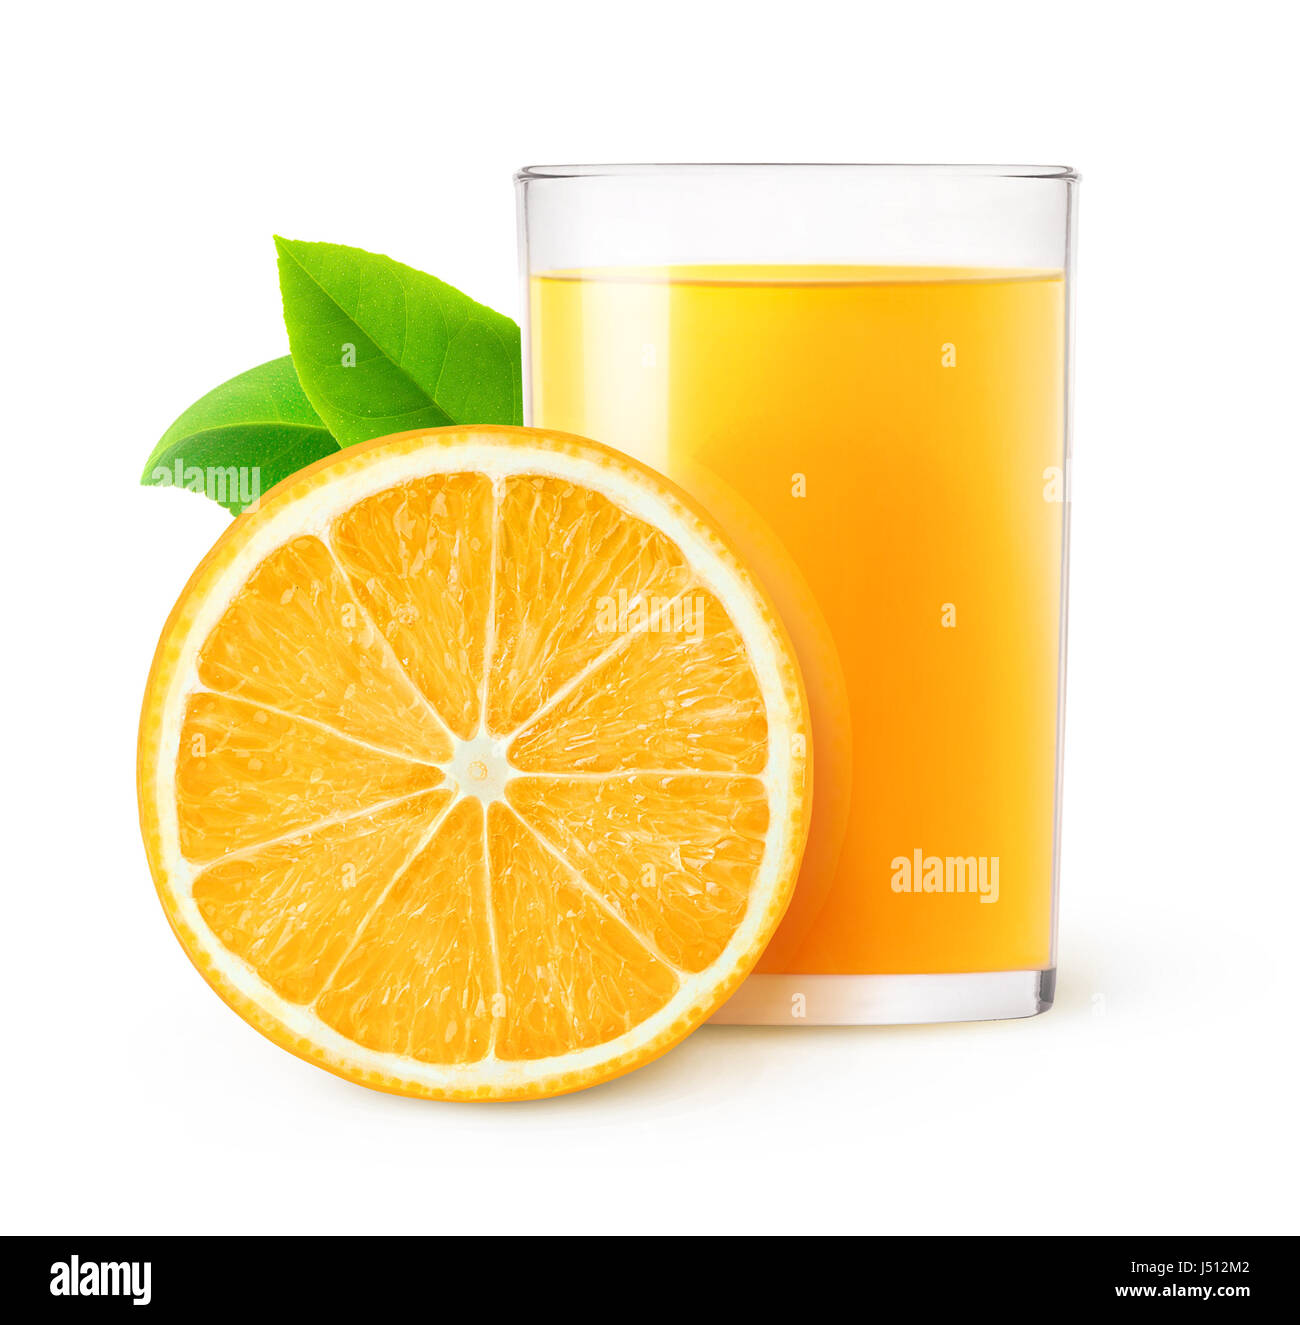 Isolated drink. Glass of orange juice and one slice of fruit isolated on white background with clipping path Stock Photo